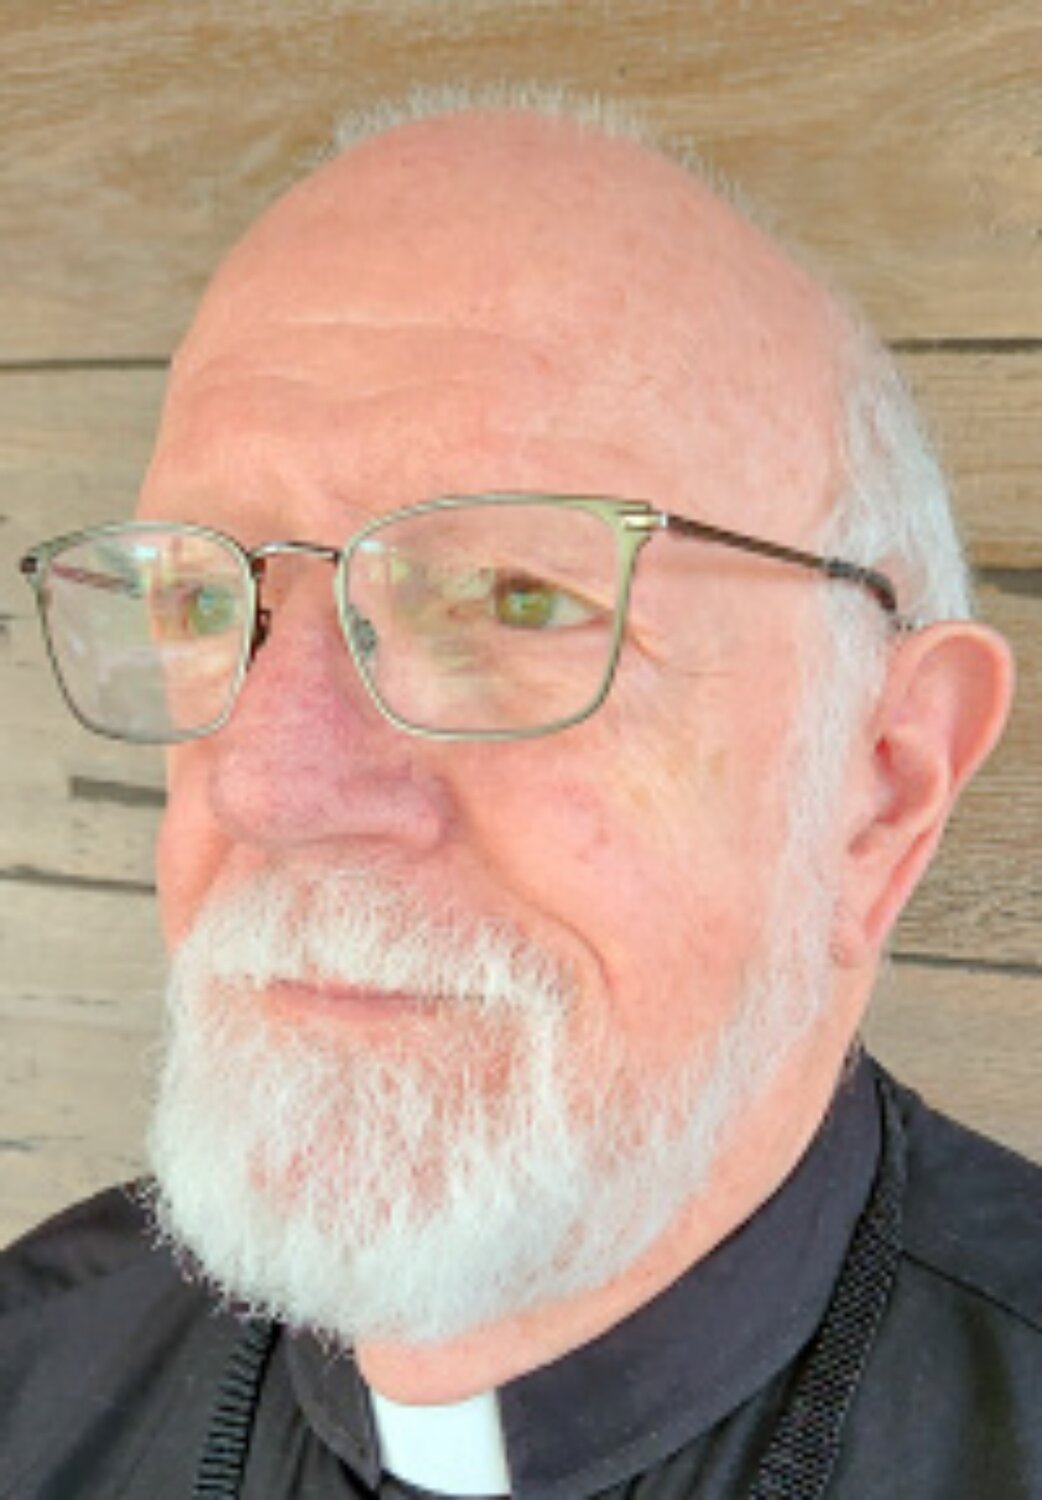 This week’s Reflections was written by the Rev. Larry Ort, retired Episcopal priest